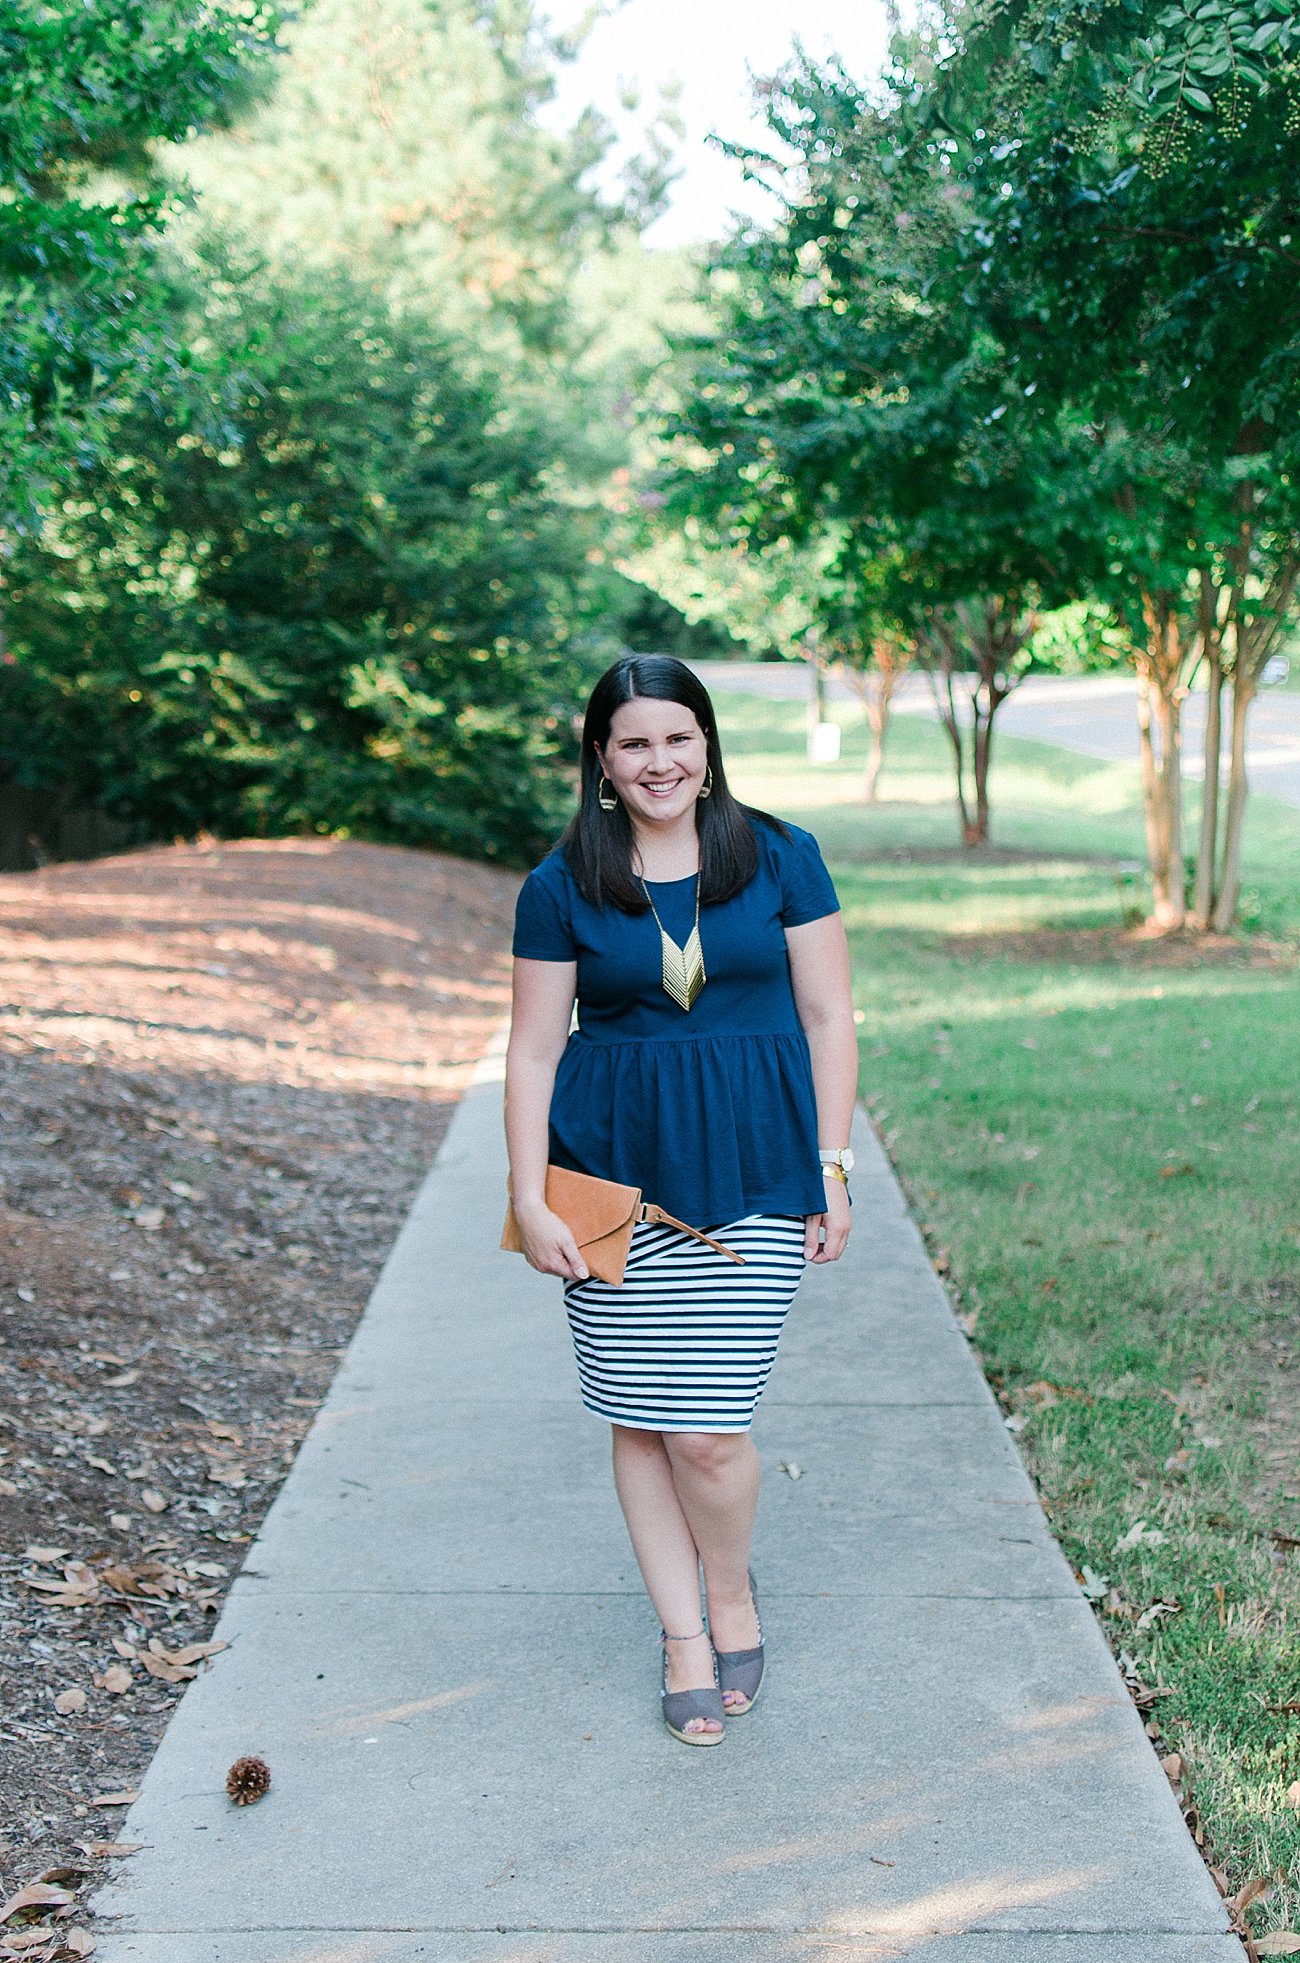 How to Style a Striped Pencil Skirt - GeekChicFashion striped pencil skirt, Elegantees top, Purpose jewelry - ethical fashion blogger (2)